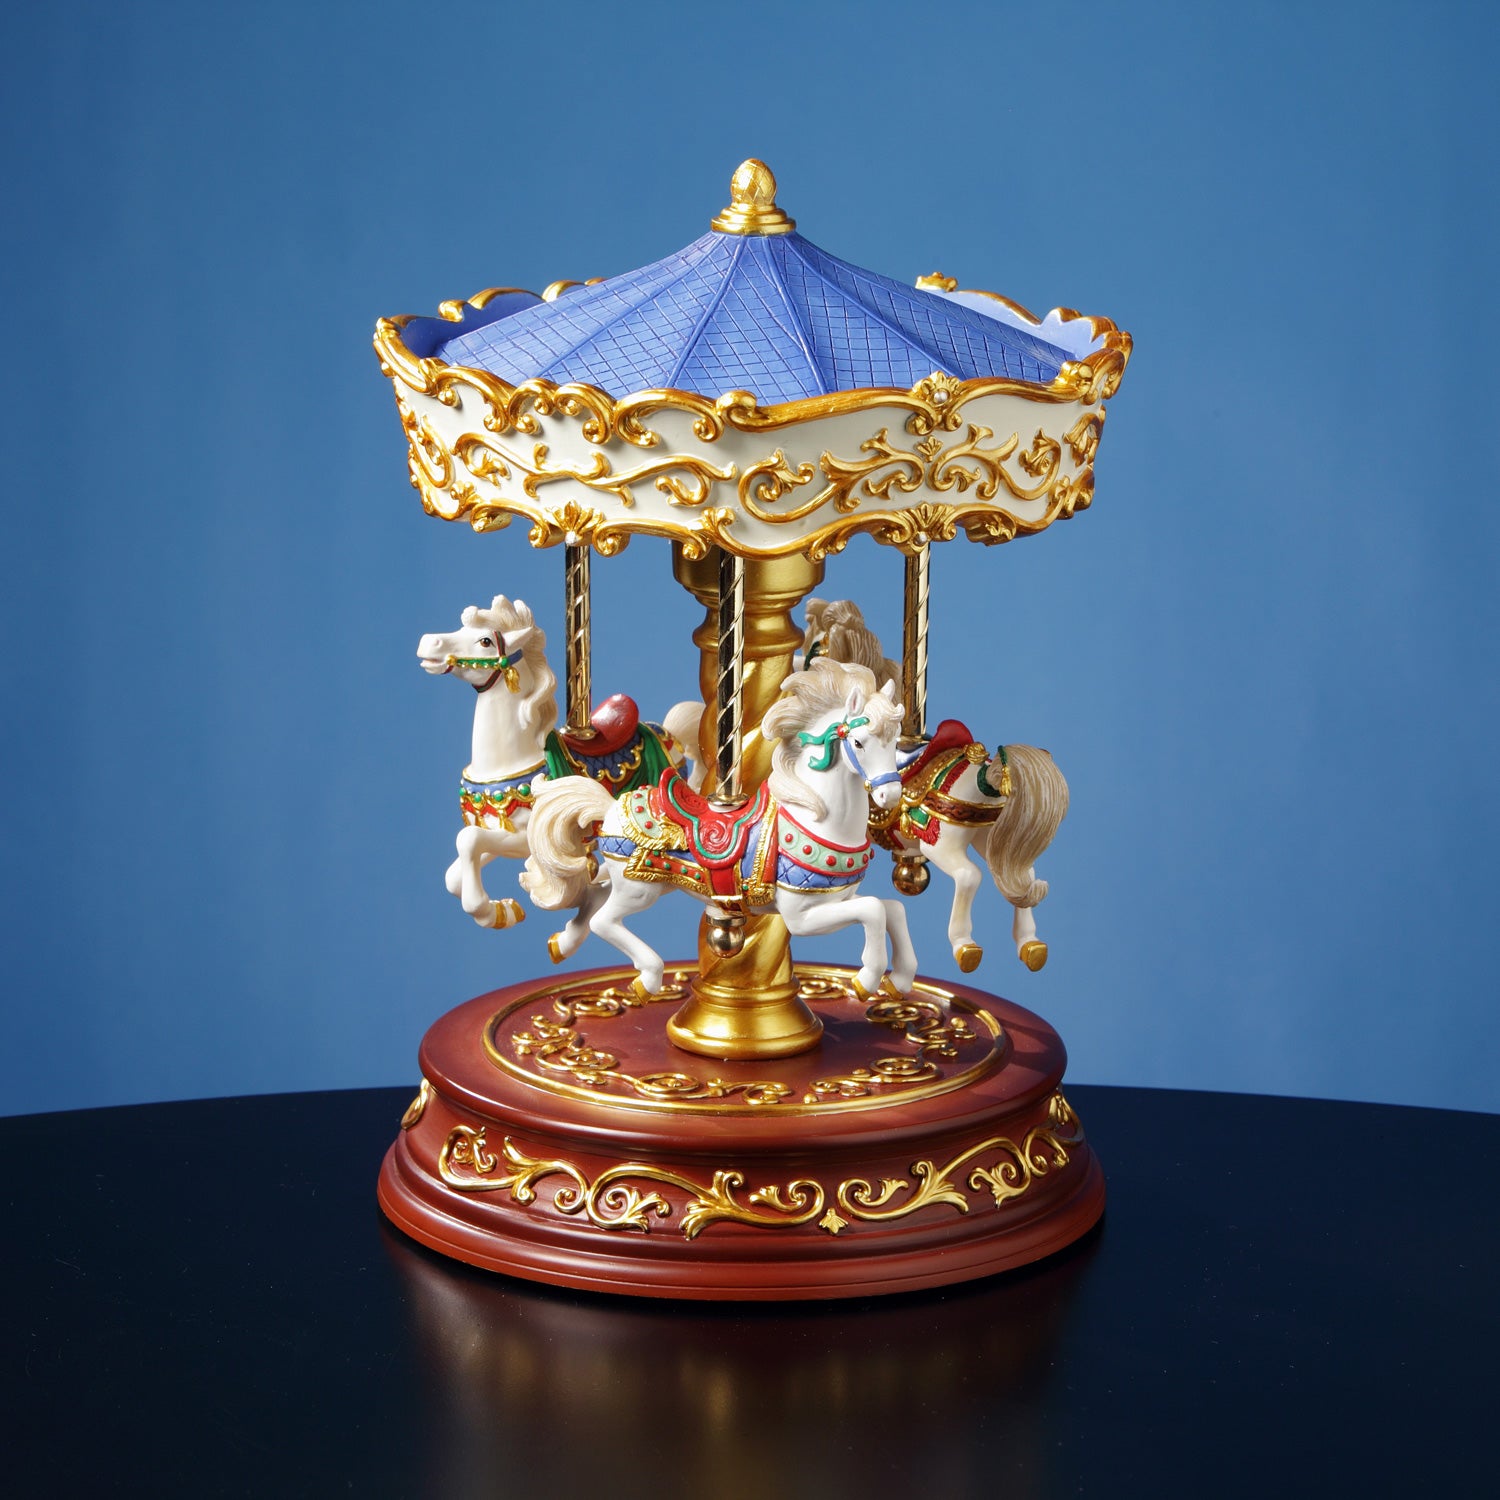 Christmas Carousel Music Box, Including Wooden Horse Music Box and